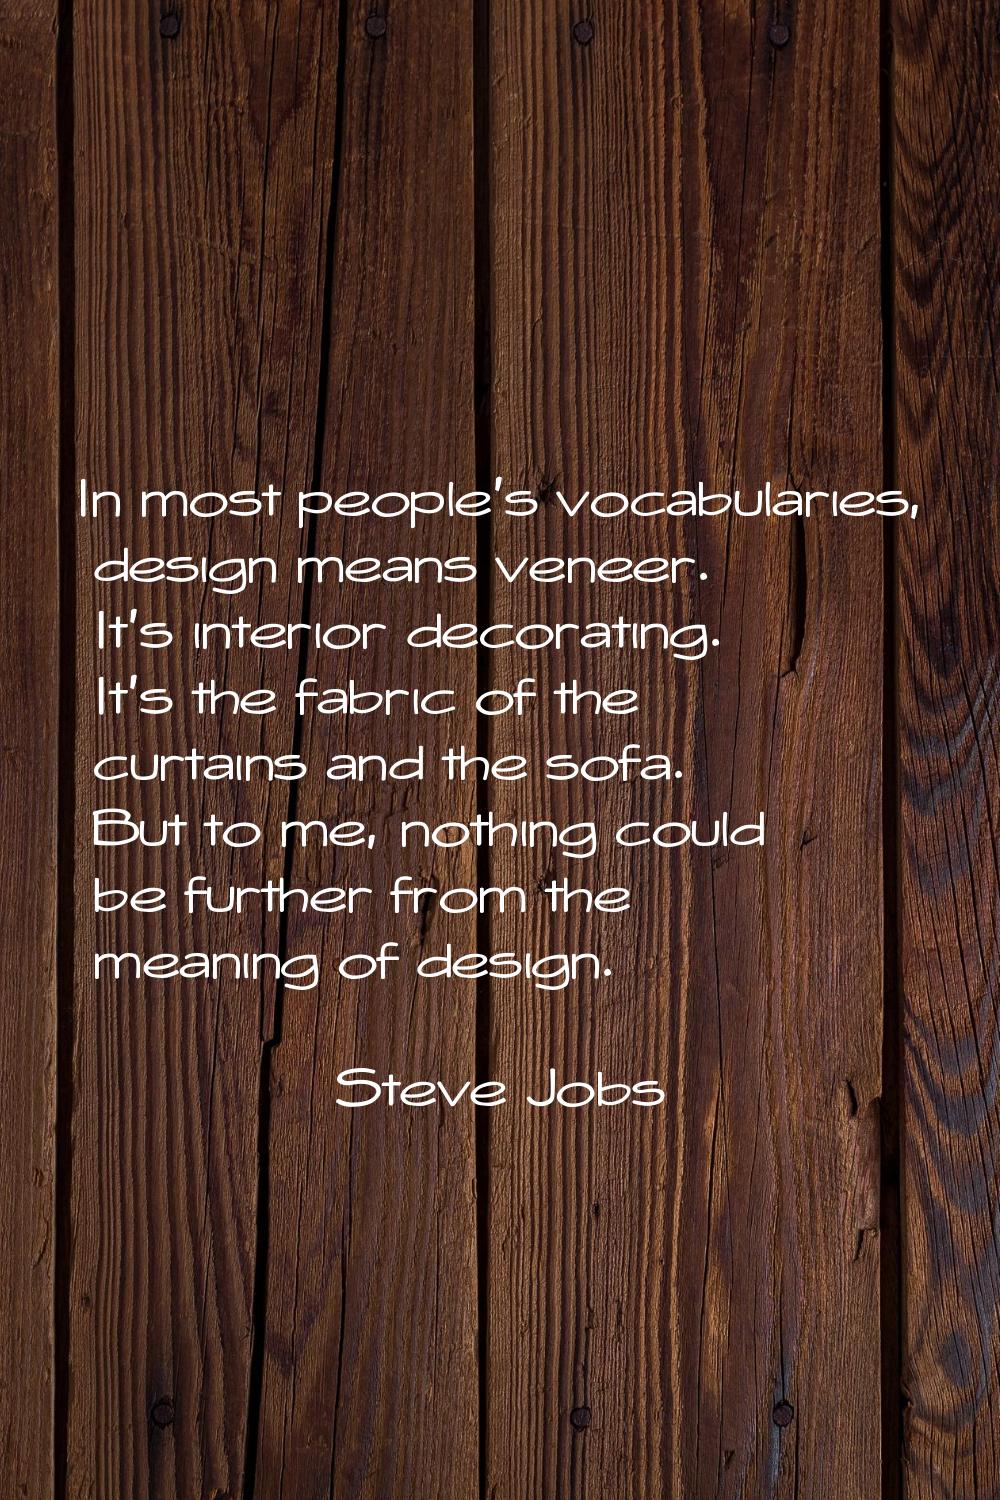 In most people's vocabularies, design means veneer. It's interior decorating. It's the fabric of th